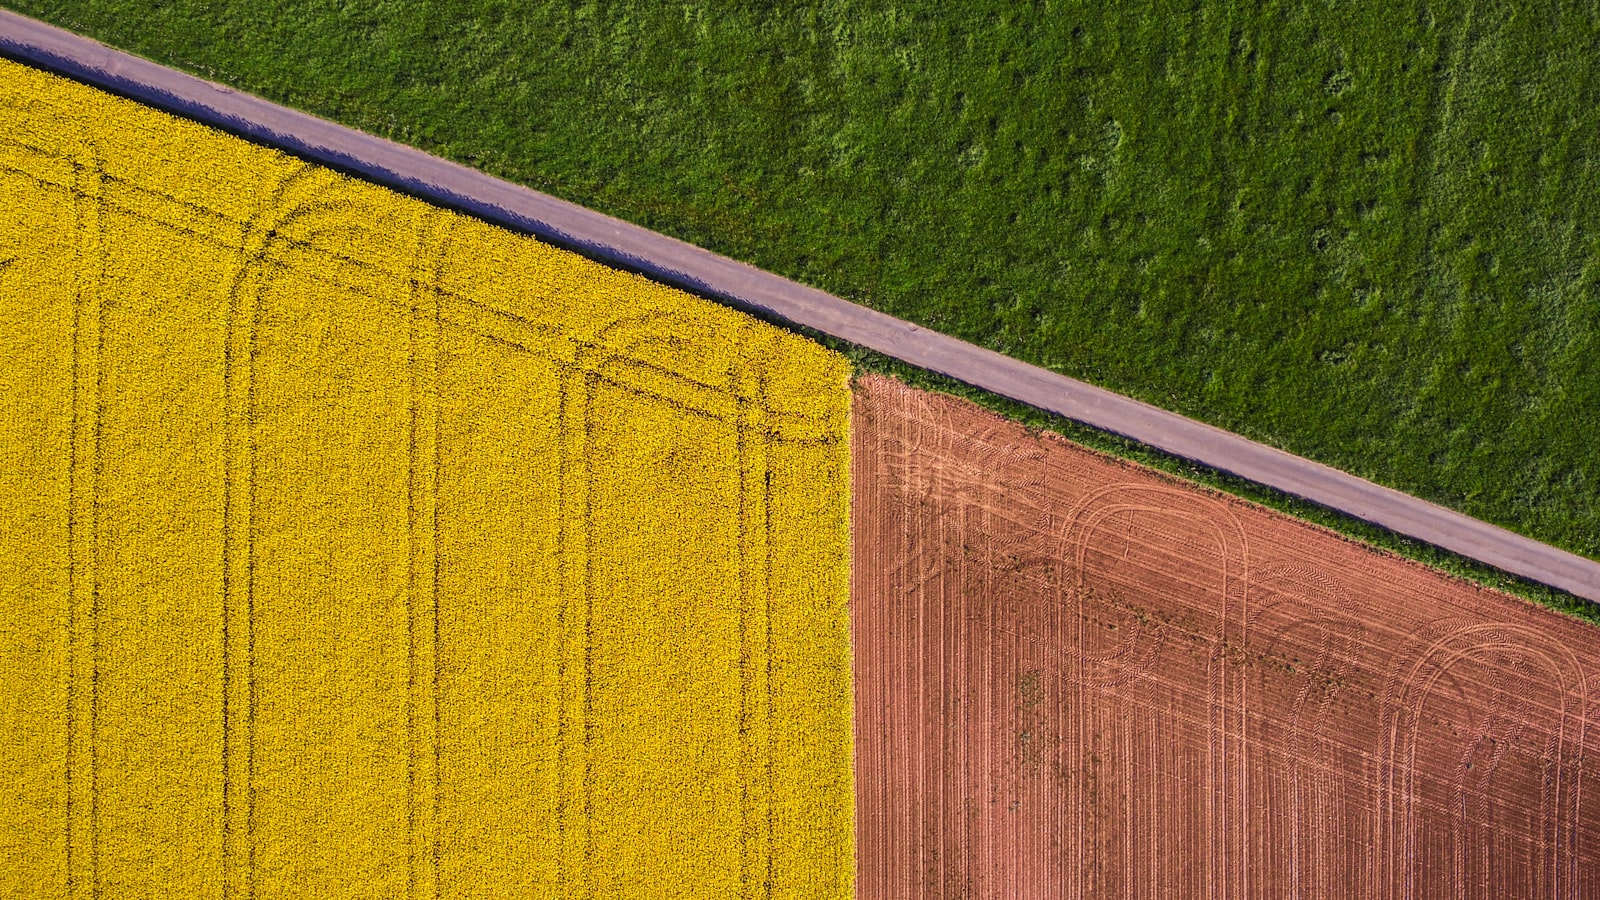 DJI FC550 sample photo. Yellow and brown textile photography